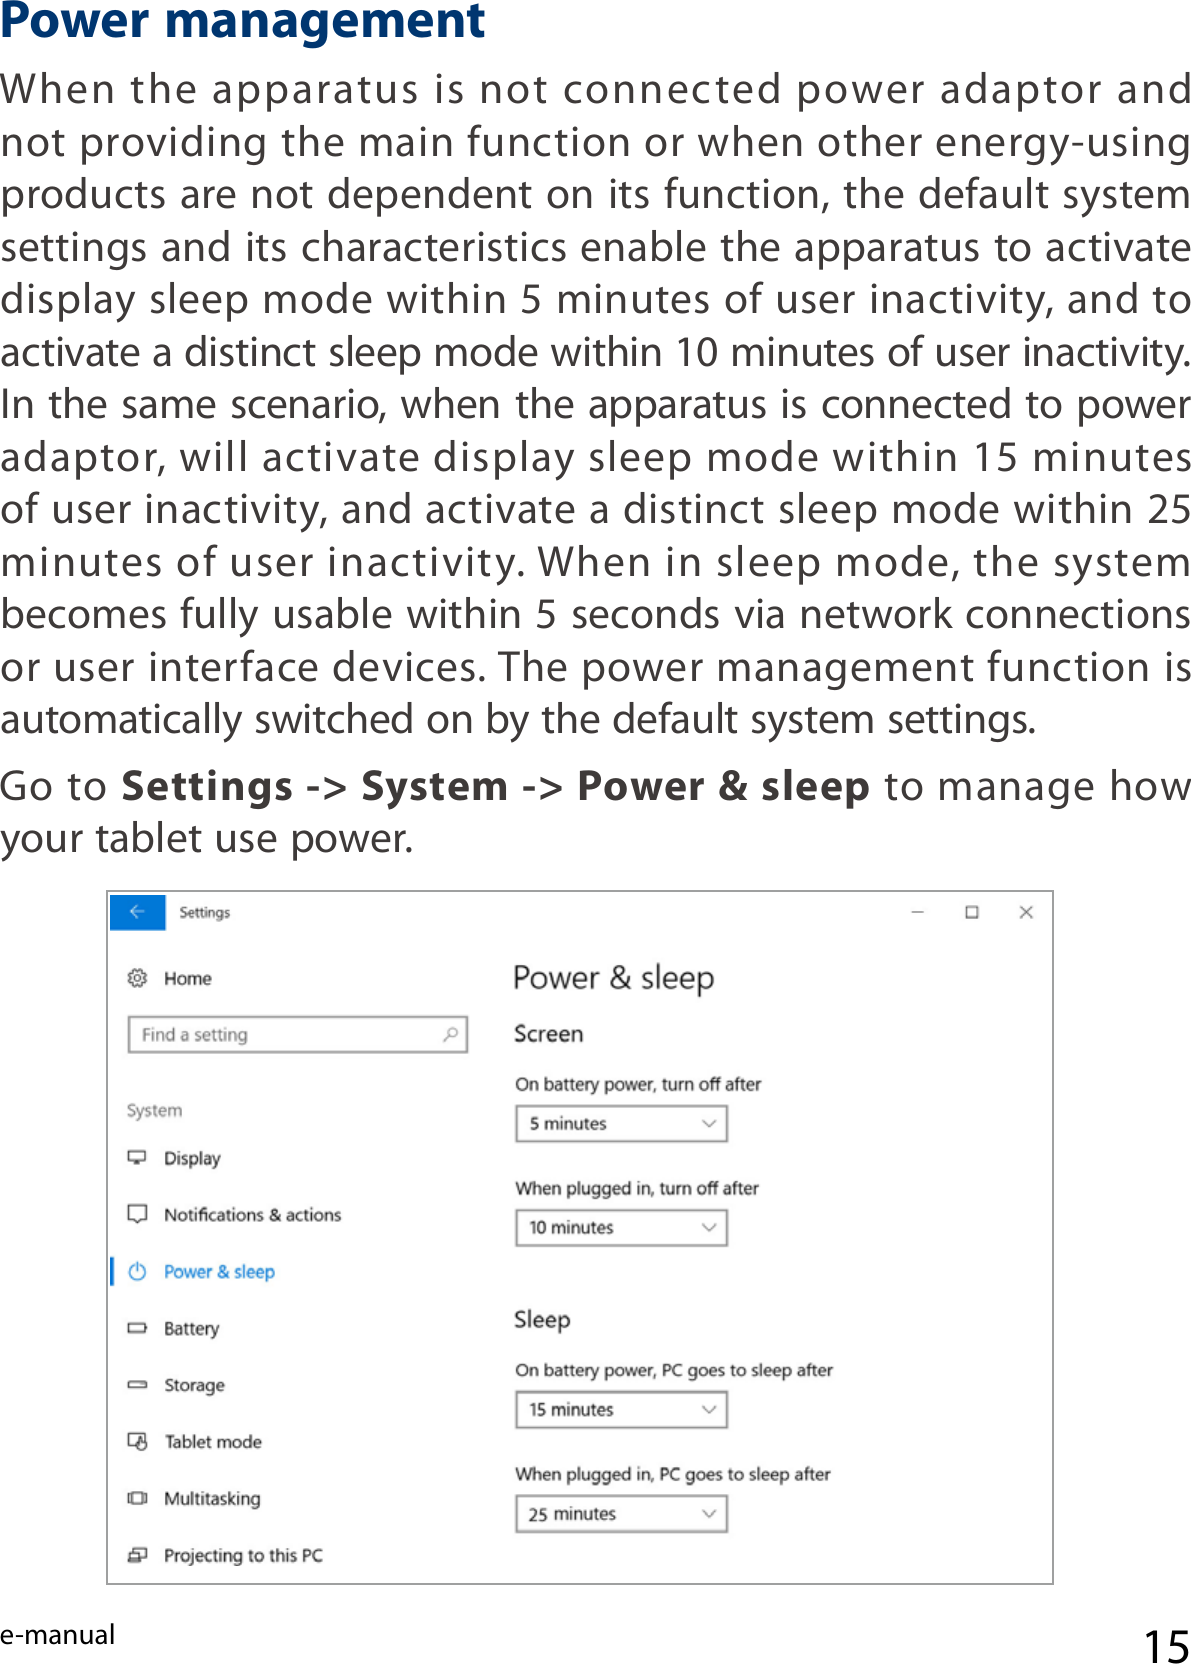 e-manual 15When  the  apparatus  is not  connected  power  adaptor  and not providing the main function or when other energy-using products are not dependent on its function, the default system settings and its characteristics enable the apparatus to activate display sleep mode within 5 minutes of user inactivity, and to activate a distinct sleep mode within 10 minutes of user inactivity. In the same scenario, when the apparatus is connected to power adaptor, will activate display sleep mode within 15 minutes of user inactivity, and activate a distinct sleep mode within 25 minutes of user inactivity. When in sleep mode, the system becomes fully usable within 5 seconds via network connections or user interface devices. The power management function is automatically switched on by the default system settings.Go to Settings -&gt; System -&gt; Power &amp; sleep to manage how your tablet use power.Power management